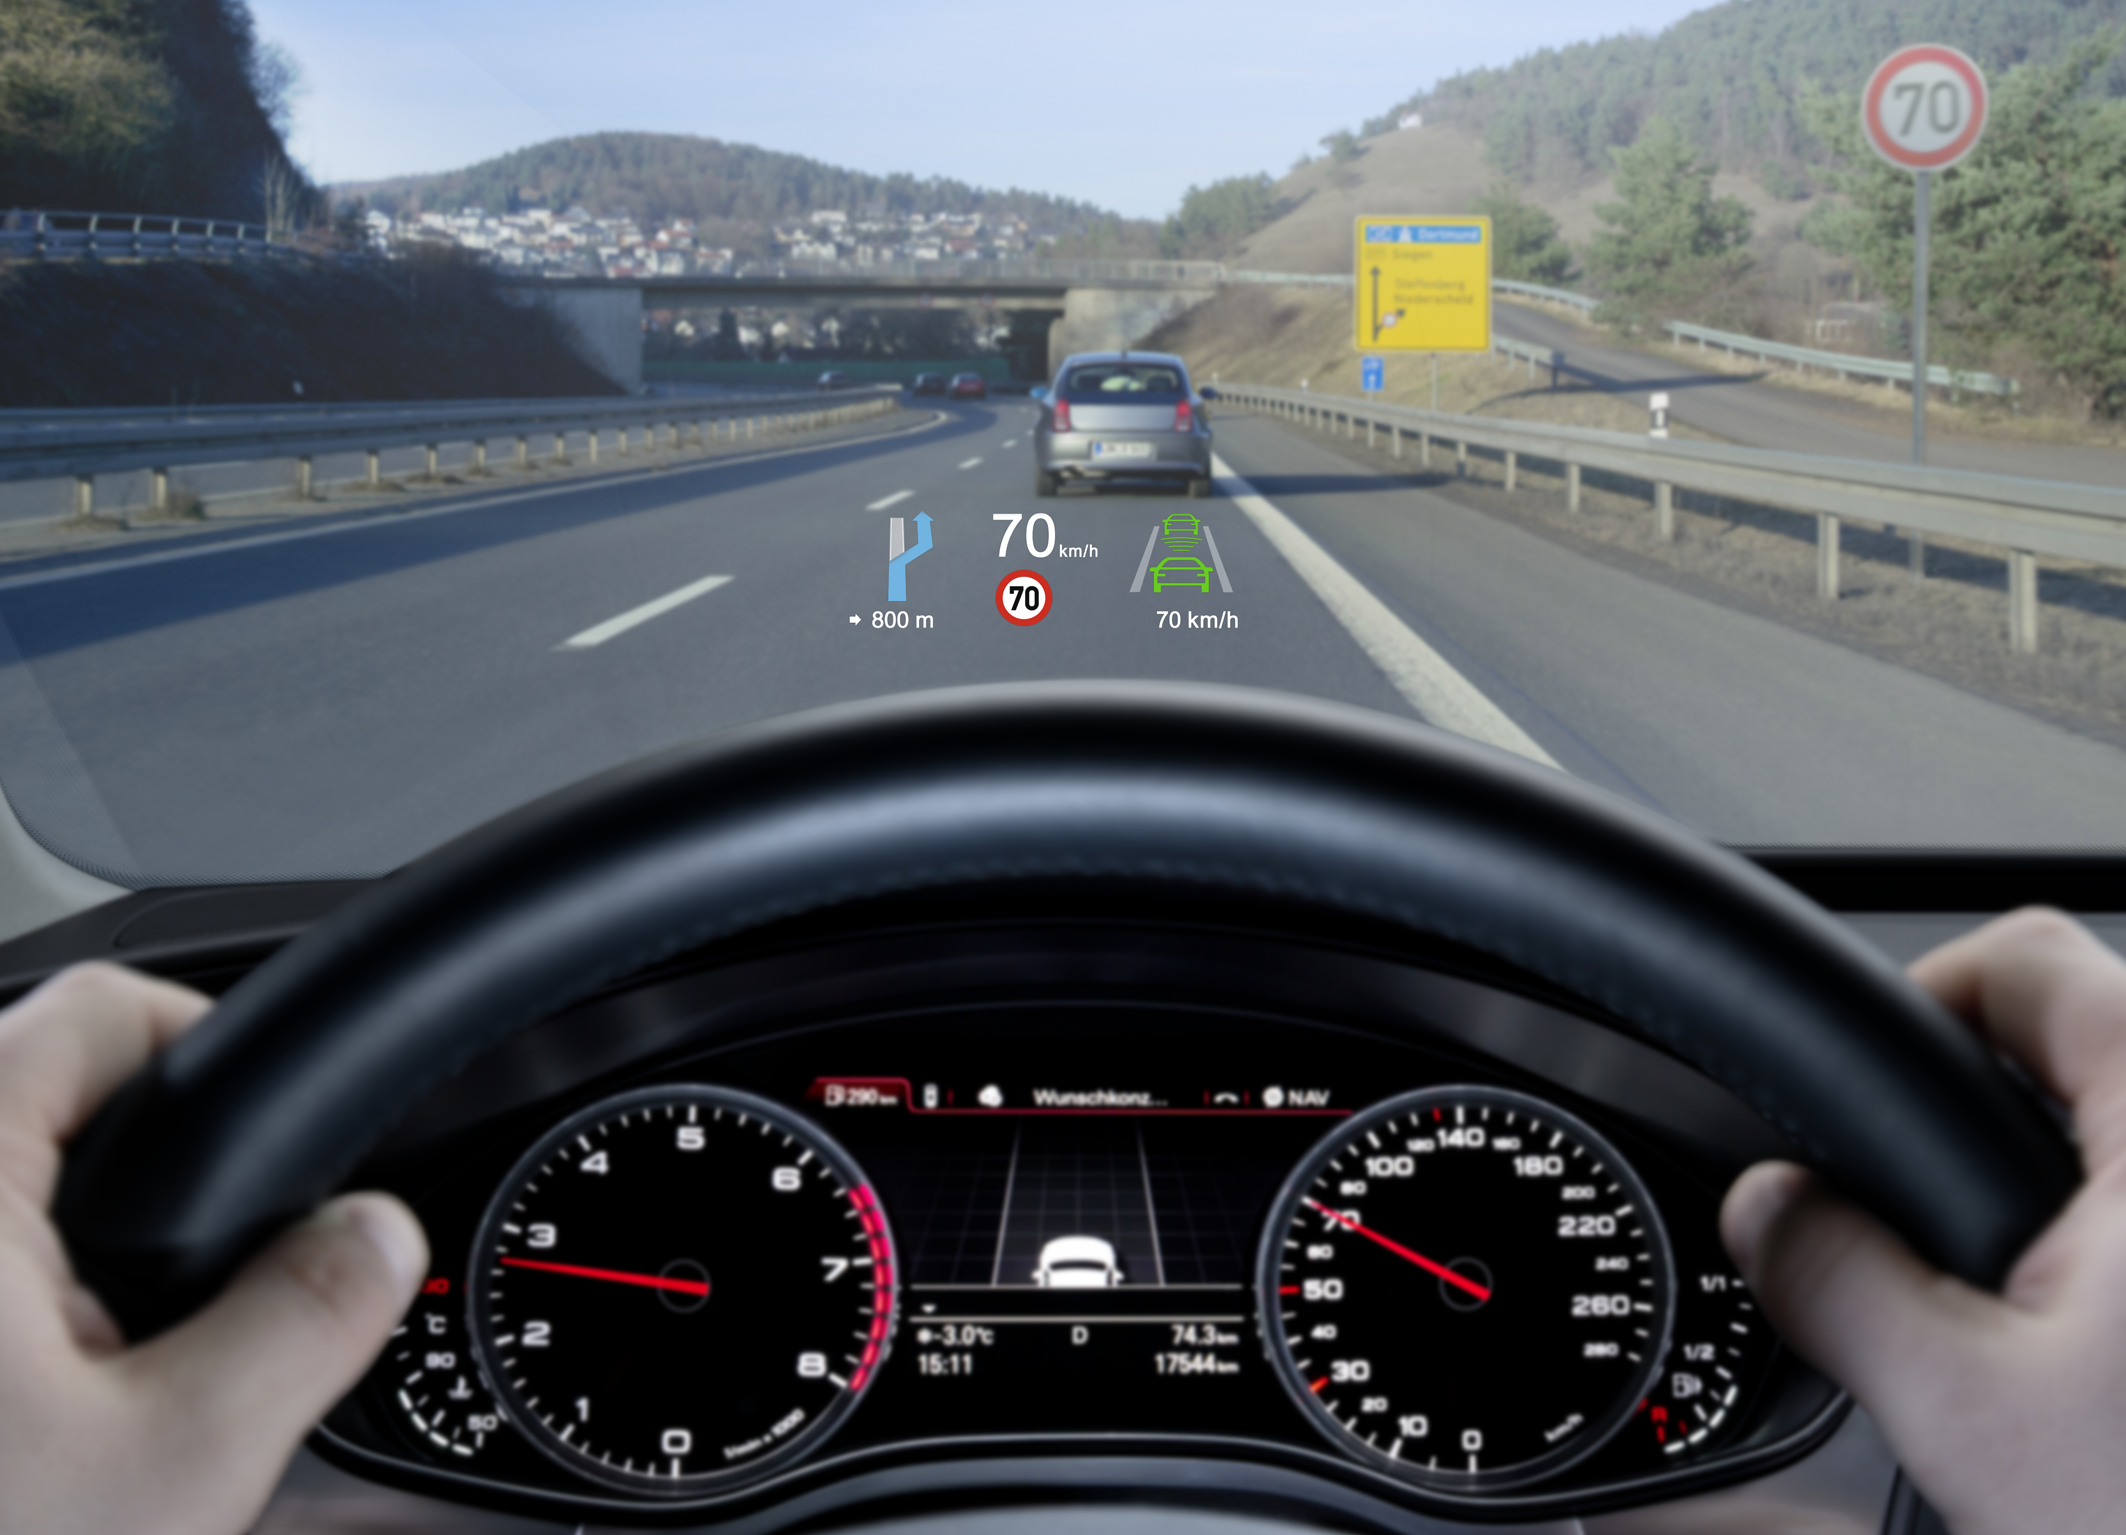 The second generation head-up display from Continental is also in series production in the Audi A6 and A7.